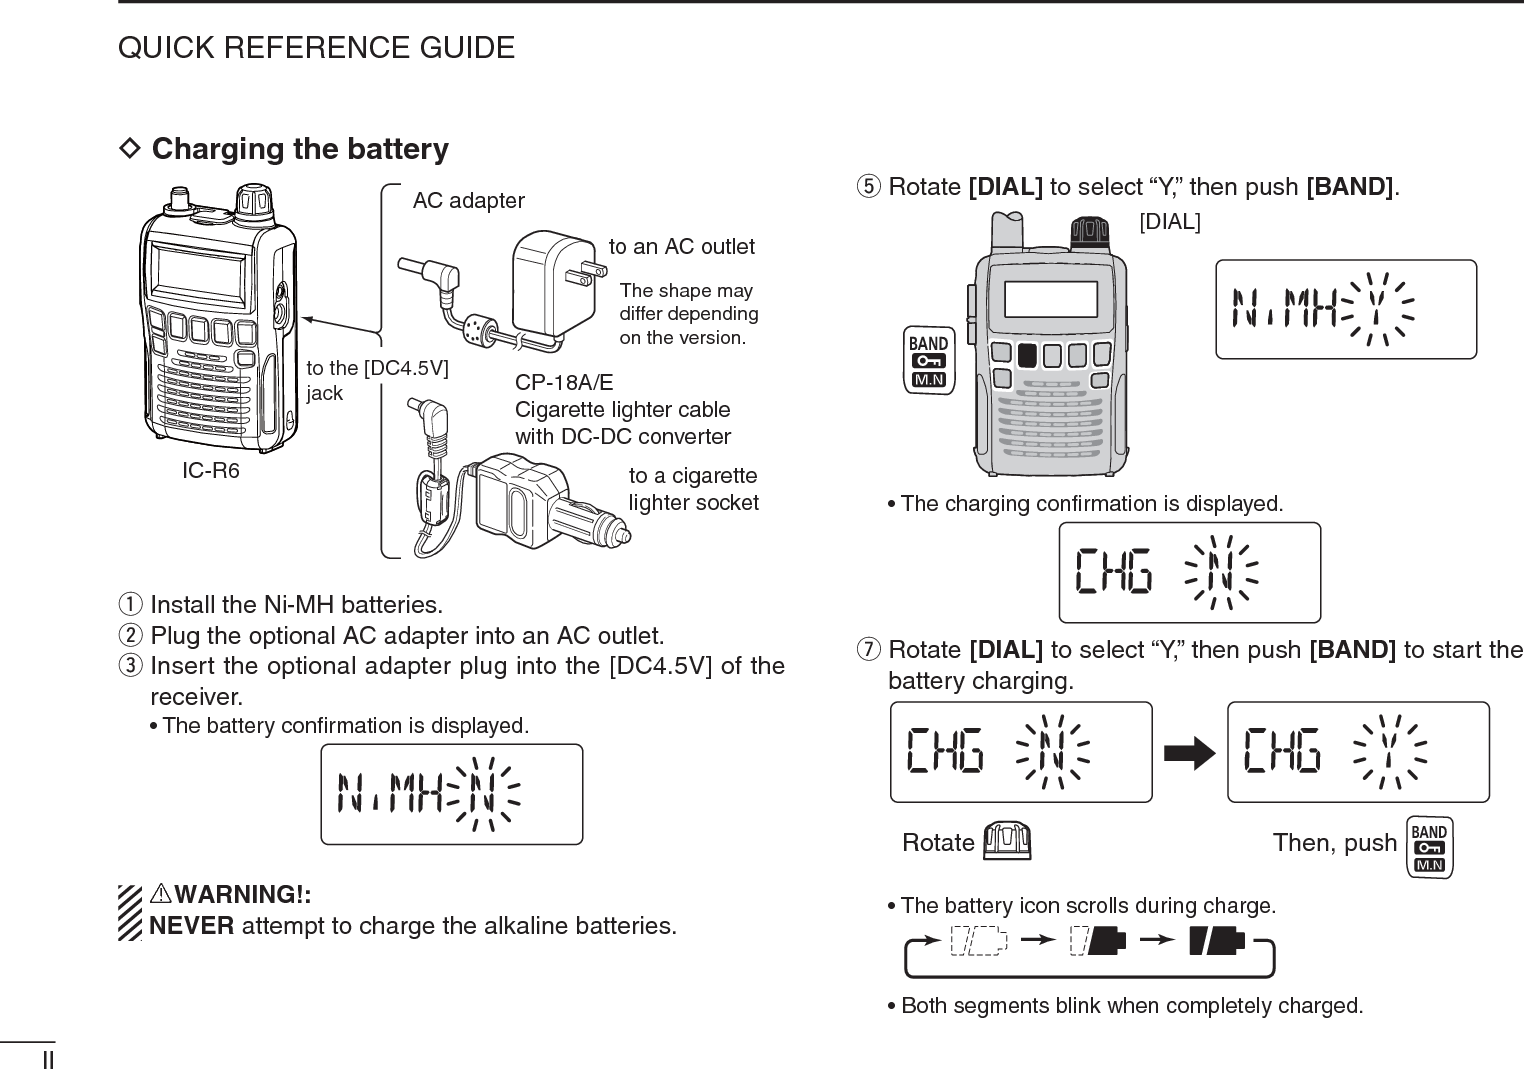 IIQUICK REFERENCE GUIDEDCharging the batteryIC-R6CP-18A/ECigarette lighter cablewith DC-DC converterAC adapterto a cigarette lighter socketThe shape maydiffer dependingon the version.to an AC outletto the [DC4.5V]jackq Install the Ni-MH batteries.w Plug the optional AC adapter into an AC outlet.eInsert the optional adapter plug into the [DC4.5V] of the receiver.• The battery conﬁrmation is displayed.RWARNING!:NEVER attempt to charge the alkaline batteries. t Rotate [DIAL] to select “Y,” then push [BAND].[DIAL]• The charging conﬁrmation is displayed.uRotate [DIAL] to select “Y,” then push [BAND] to start the battery charging.Rotate Then, push• The battery icon scrolls during charge.• Both segments blink when completely charged.